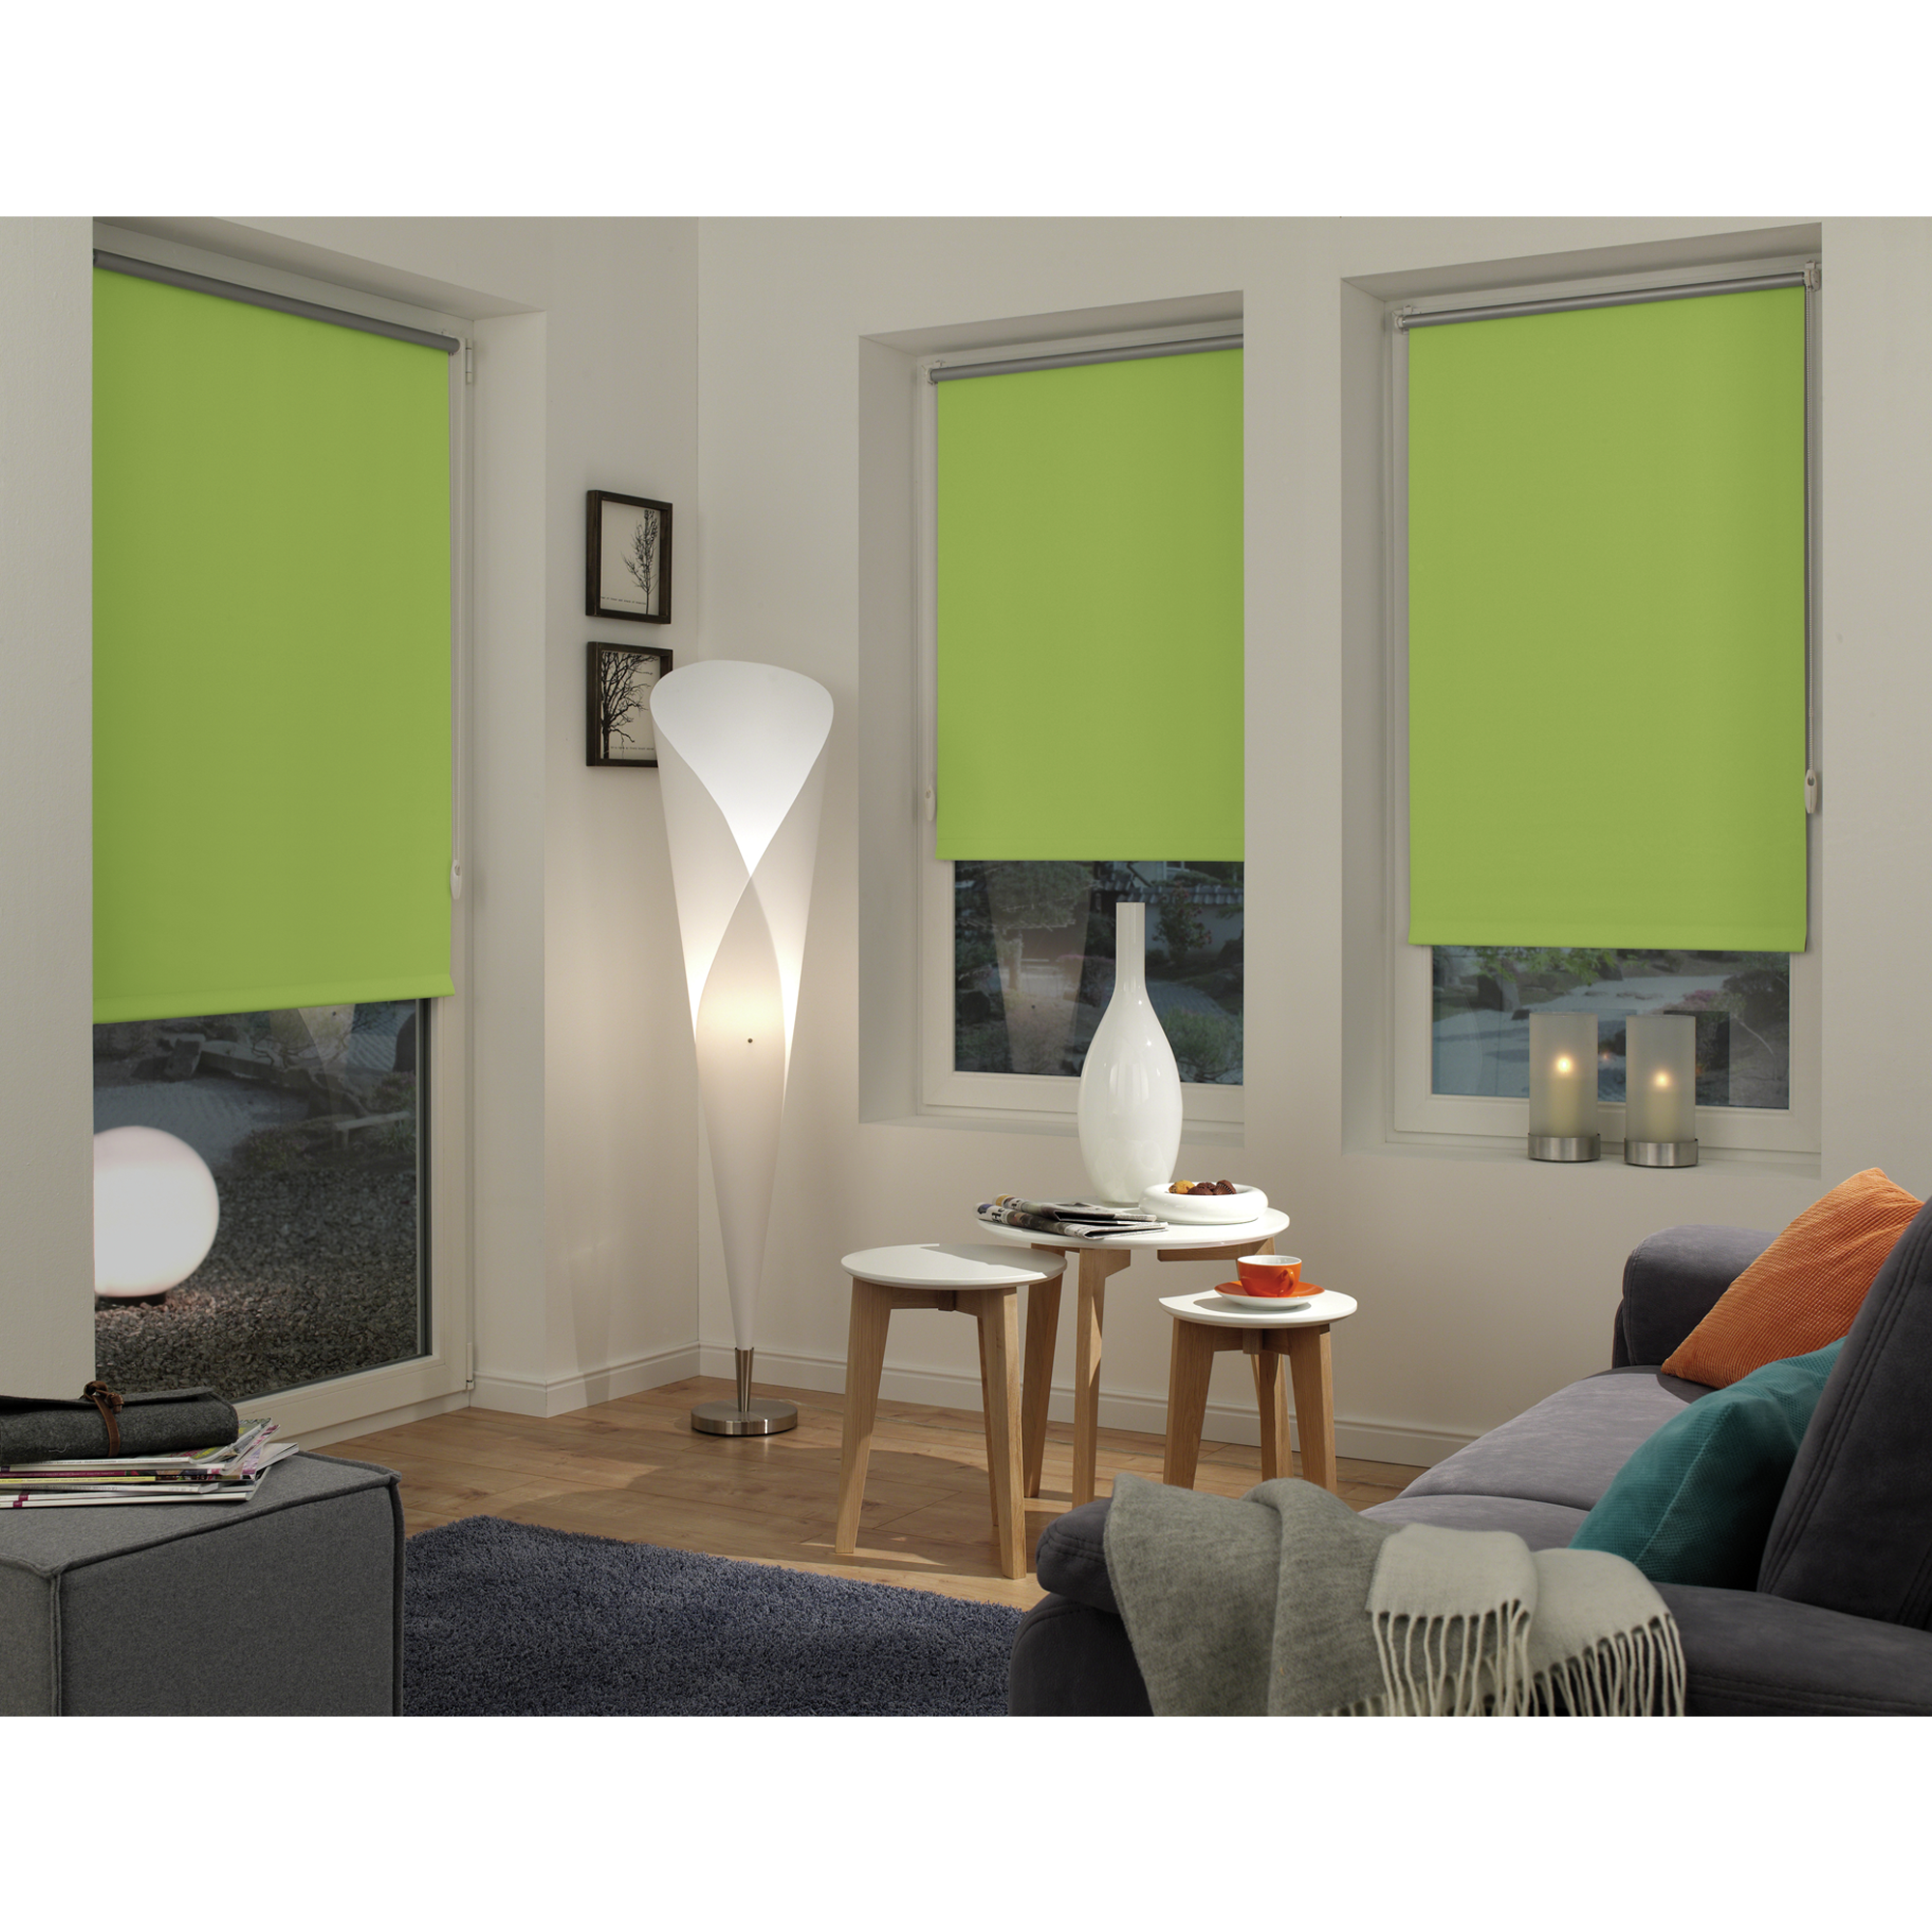 EasyFix Rollo 'Thermo energiesparend' apfel 100 x 150 cm + product picture